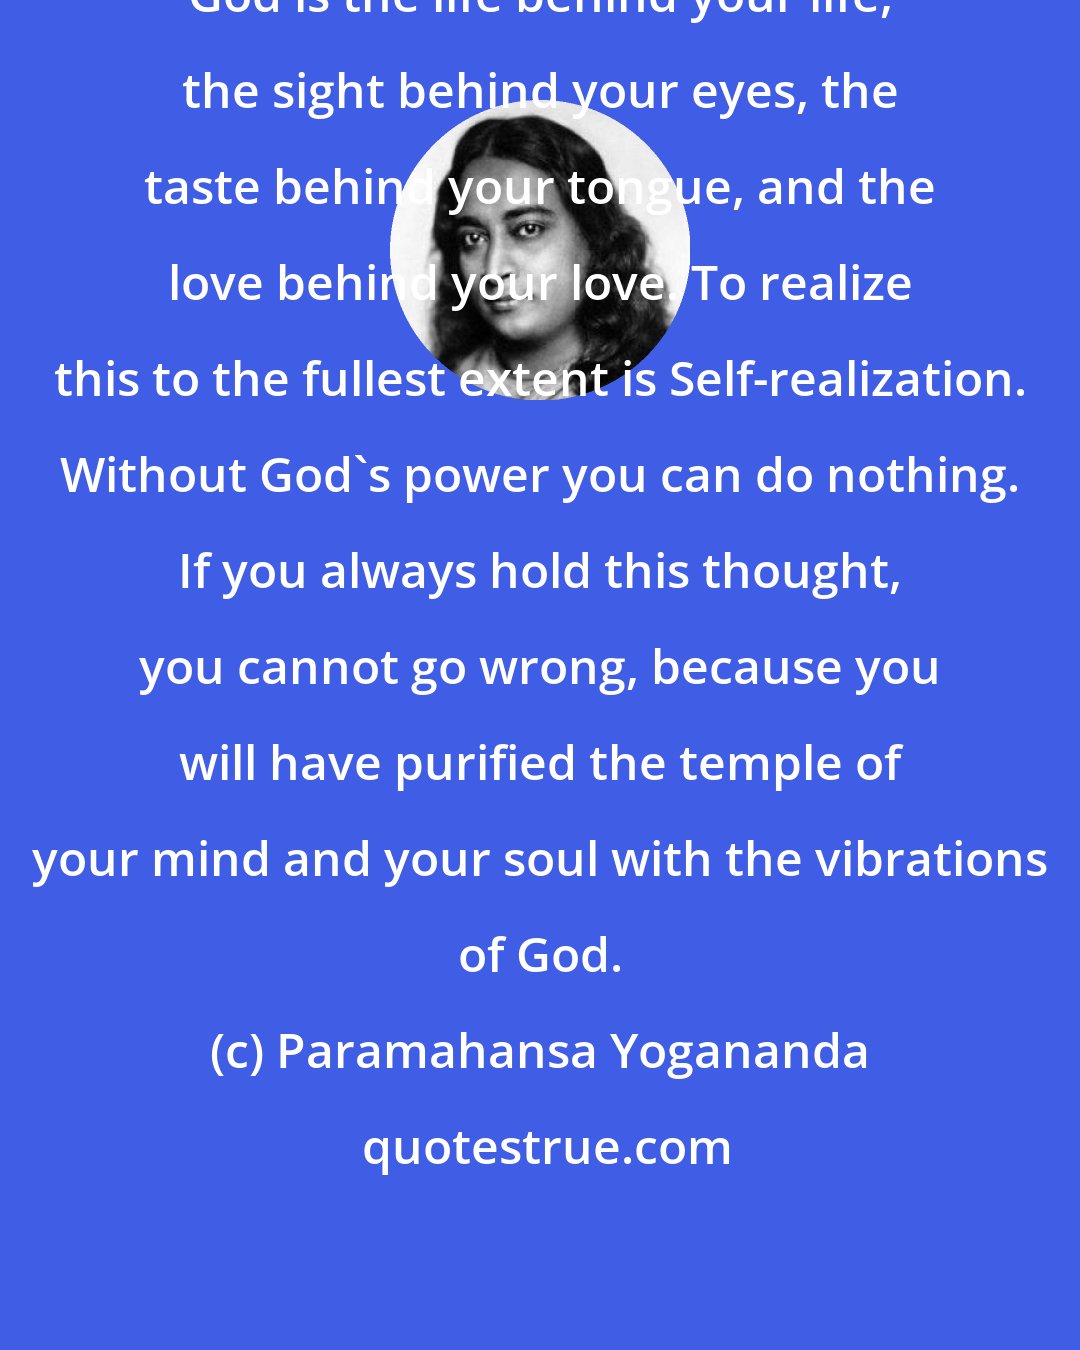 Paramahansa Yogananda: God is the life behind your life, the sight behind your eyes, the taste behind your tongue, and the love behind your love. To realize this to the fullest extent is Self-realization. Without God's power you can do nothing. If you always hold this thought, you cannot go wrong, because you will have purified the temple of your mind and your soul with the vibrations of God.